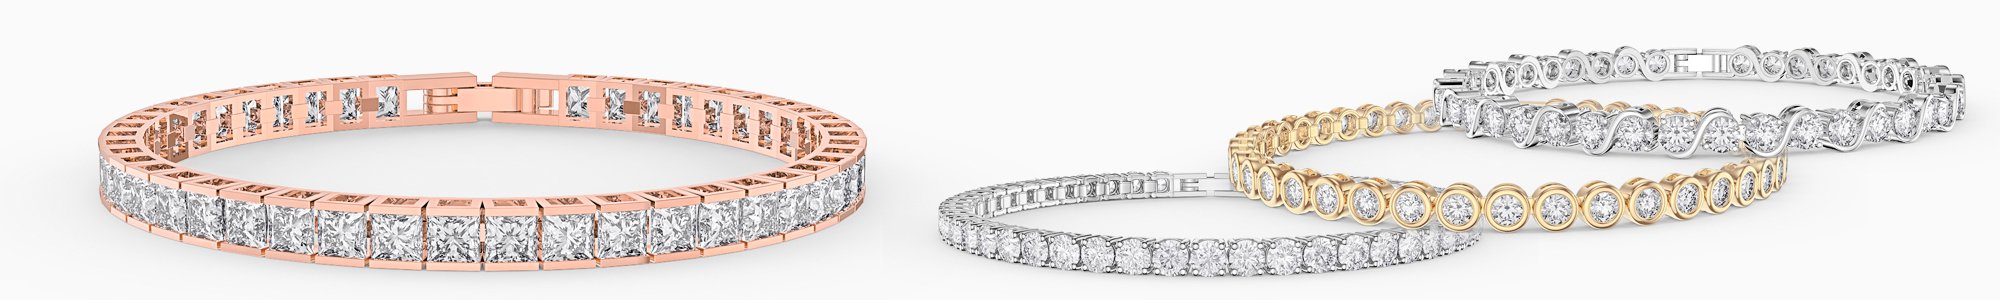 Shop Diamond Bracelets by Jian London. Buy direct and save from our wide selection of Diamond Bracelets at the Jian London jewellery Store. Free UK Delivery